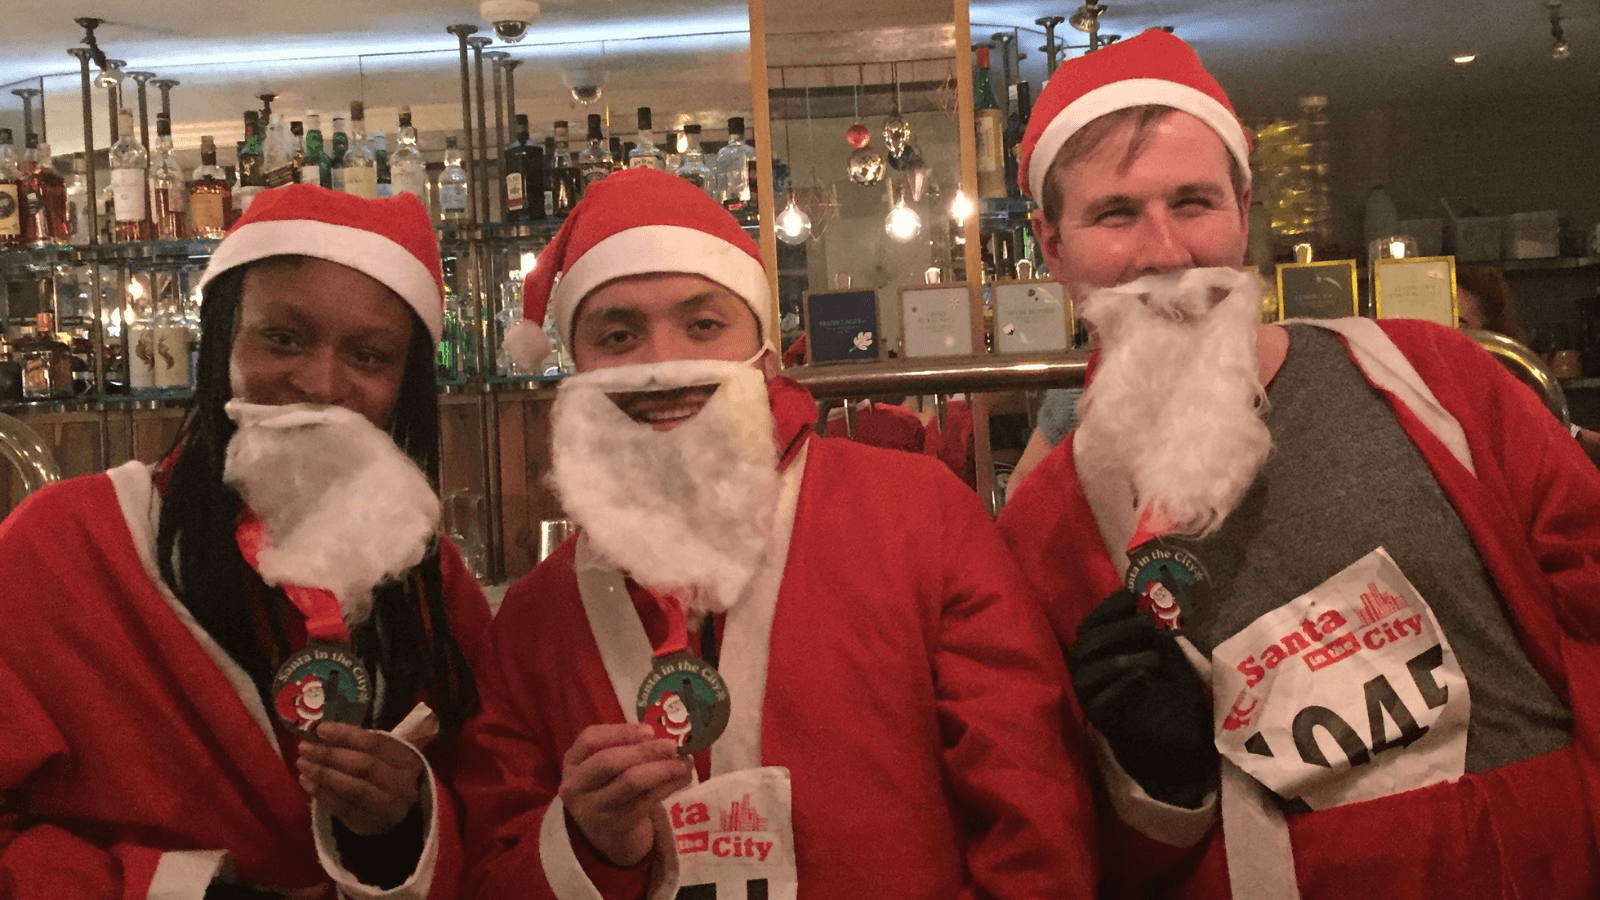 Three people dressed as Father Christmas looking at the camera and smiling